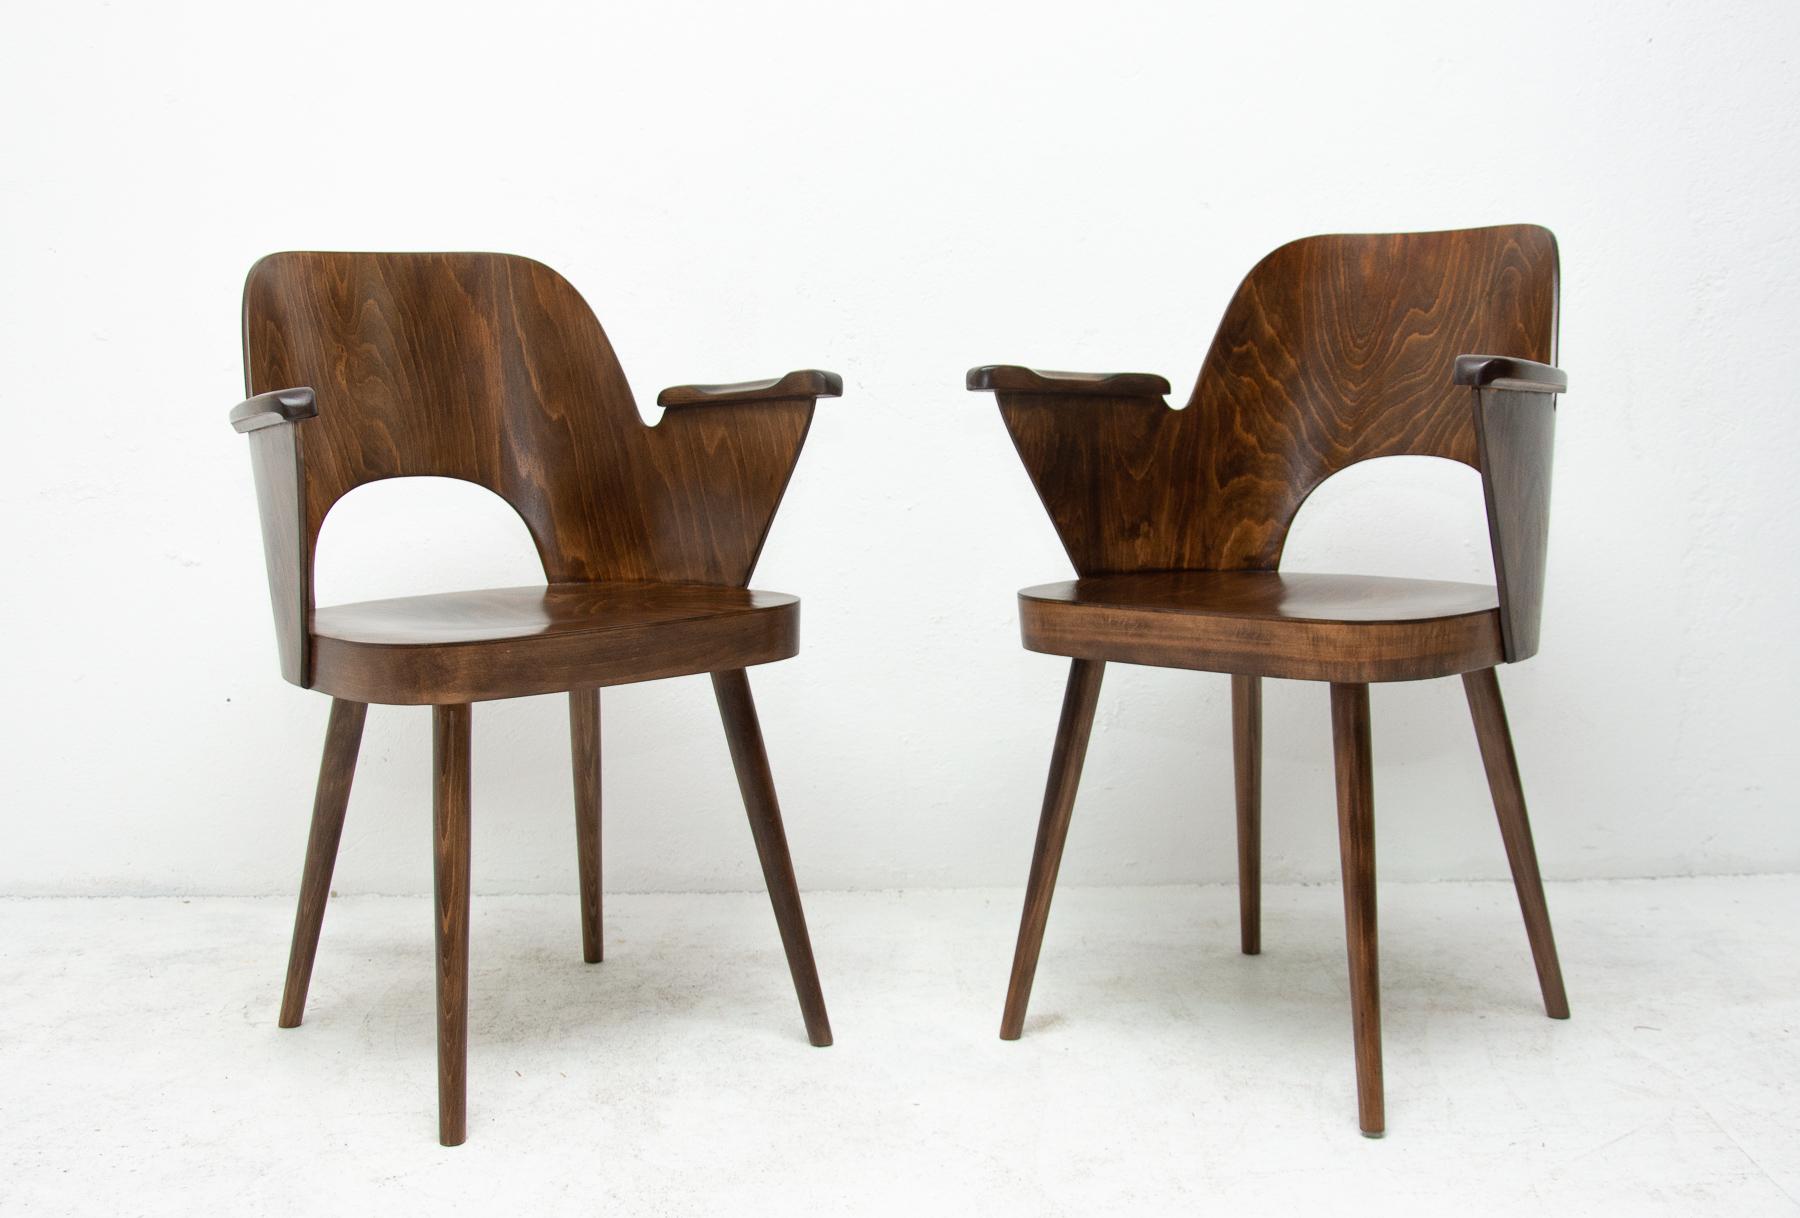 These armchairs are attribute to theAustrian architect Oswald Haerdtl or the Czechoslovak architect Radomír Hofman.

The chairs are made from dark stained bent beech wood. They were made in the former Czechoslovakia for TON Bystrice pod Hostýnem